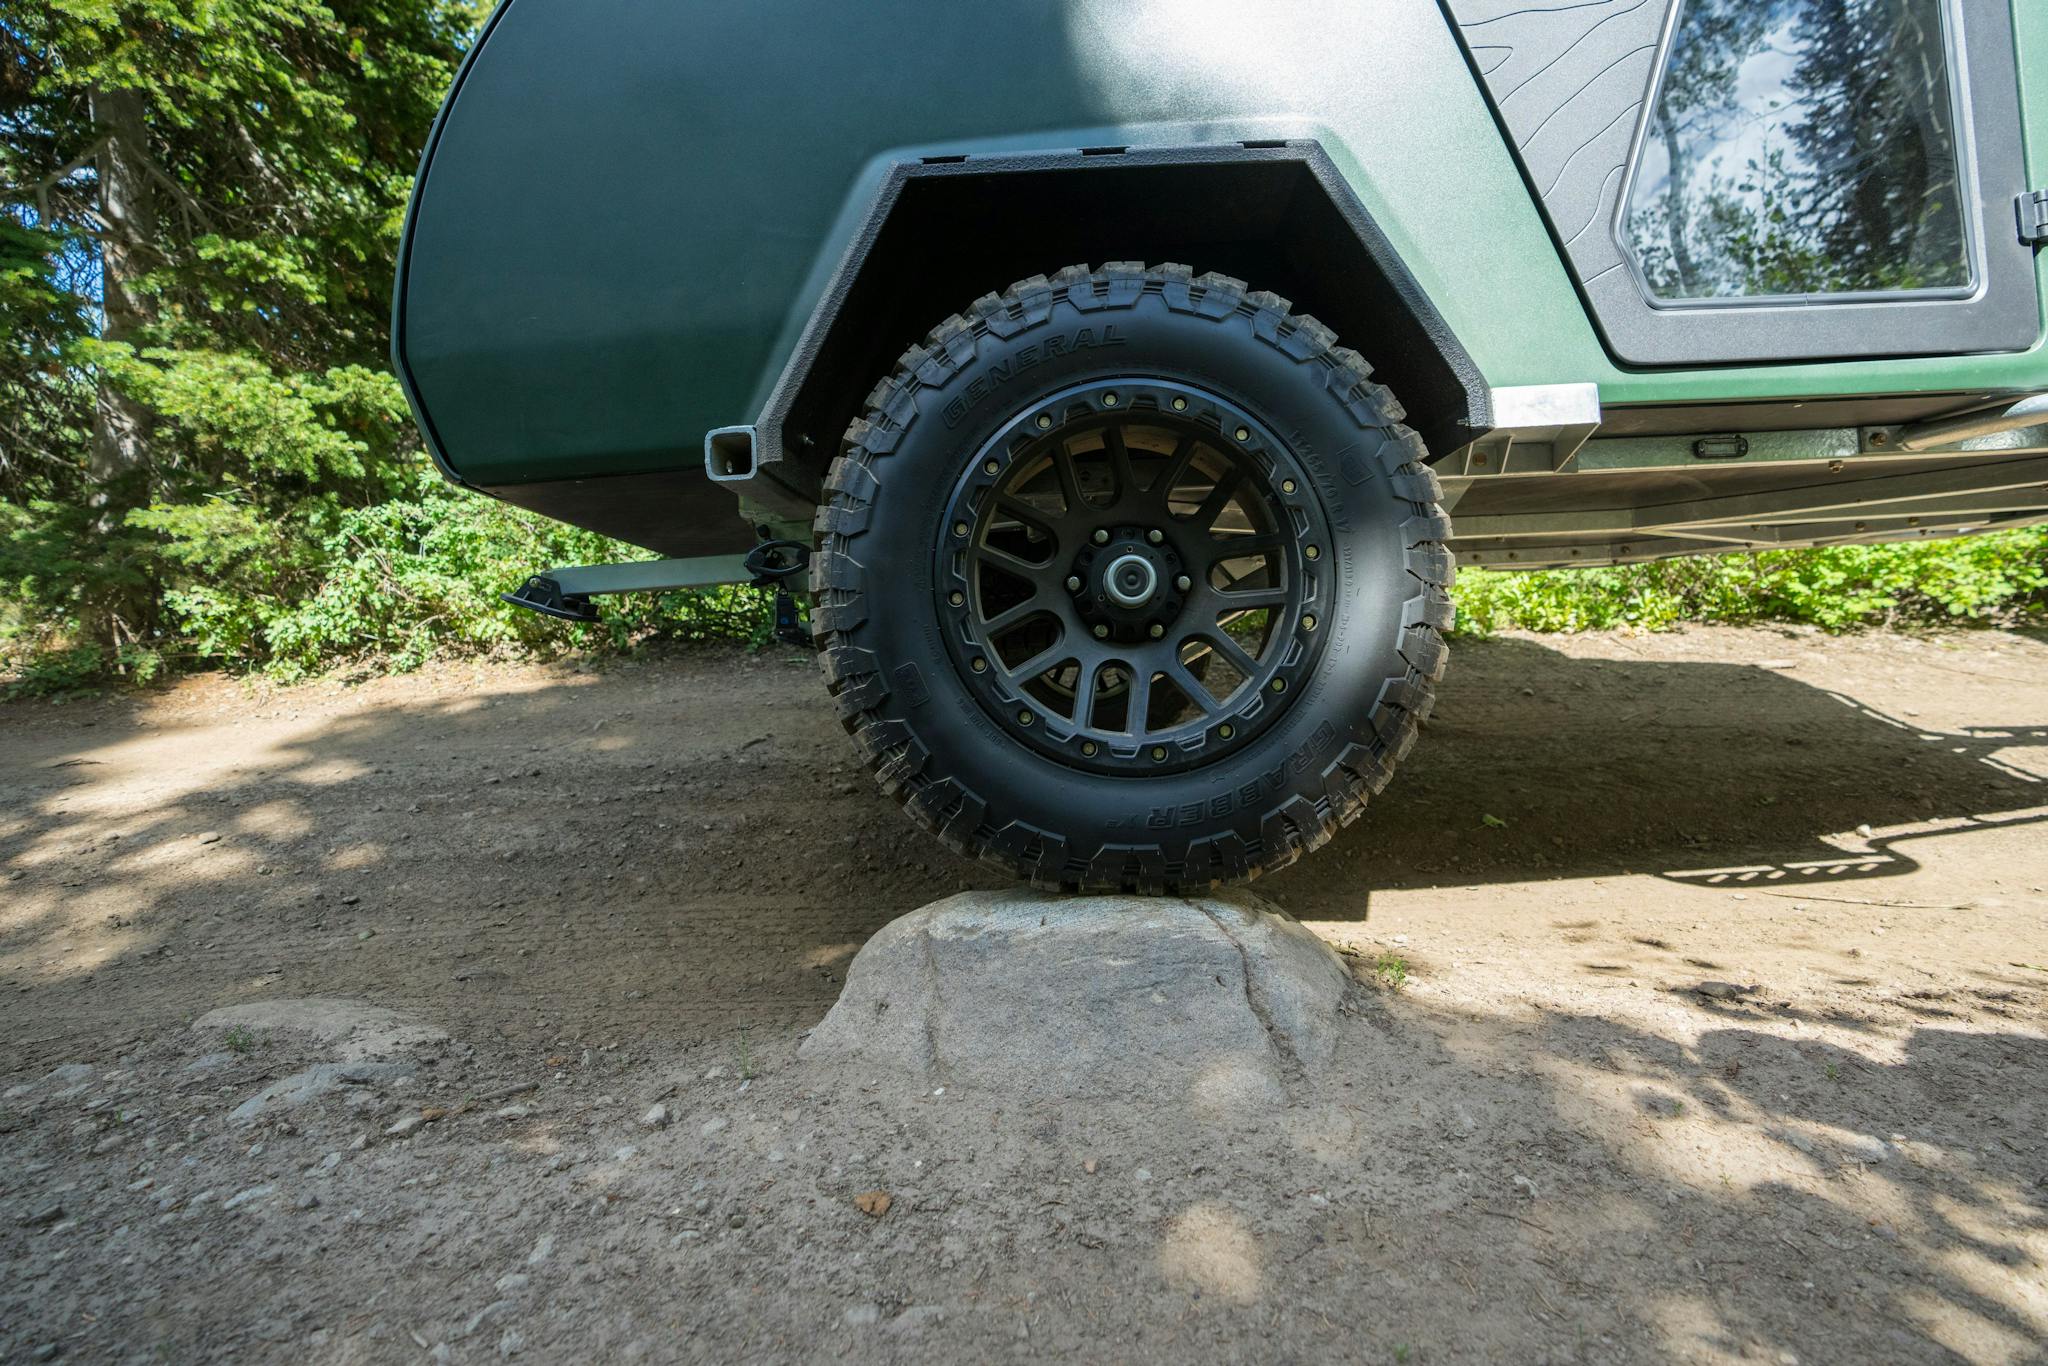 The offroad capability of the TOPO2, an adventure trailer, is on display as is easily rolls over rocks on an offroading trail.